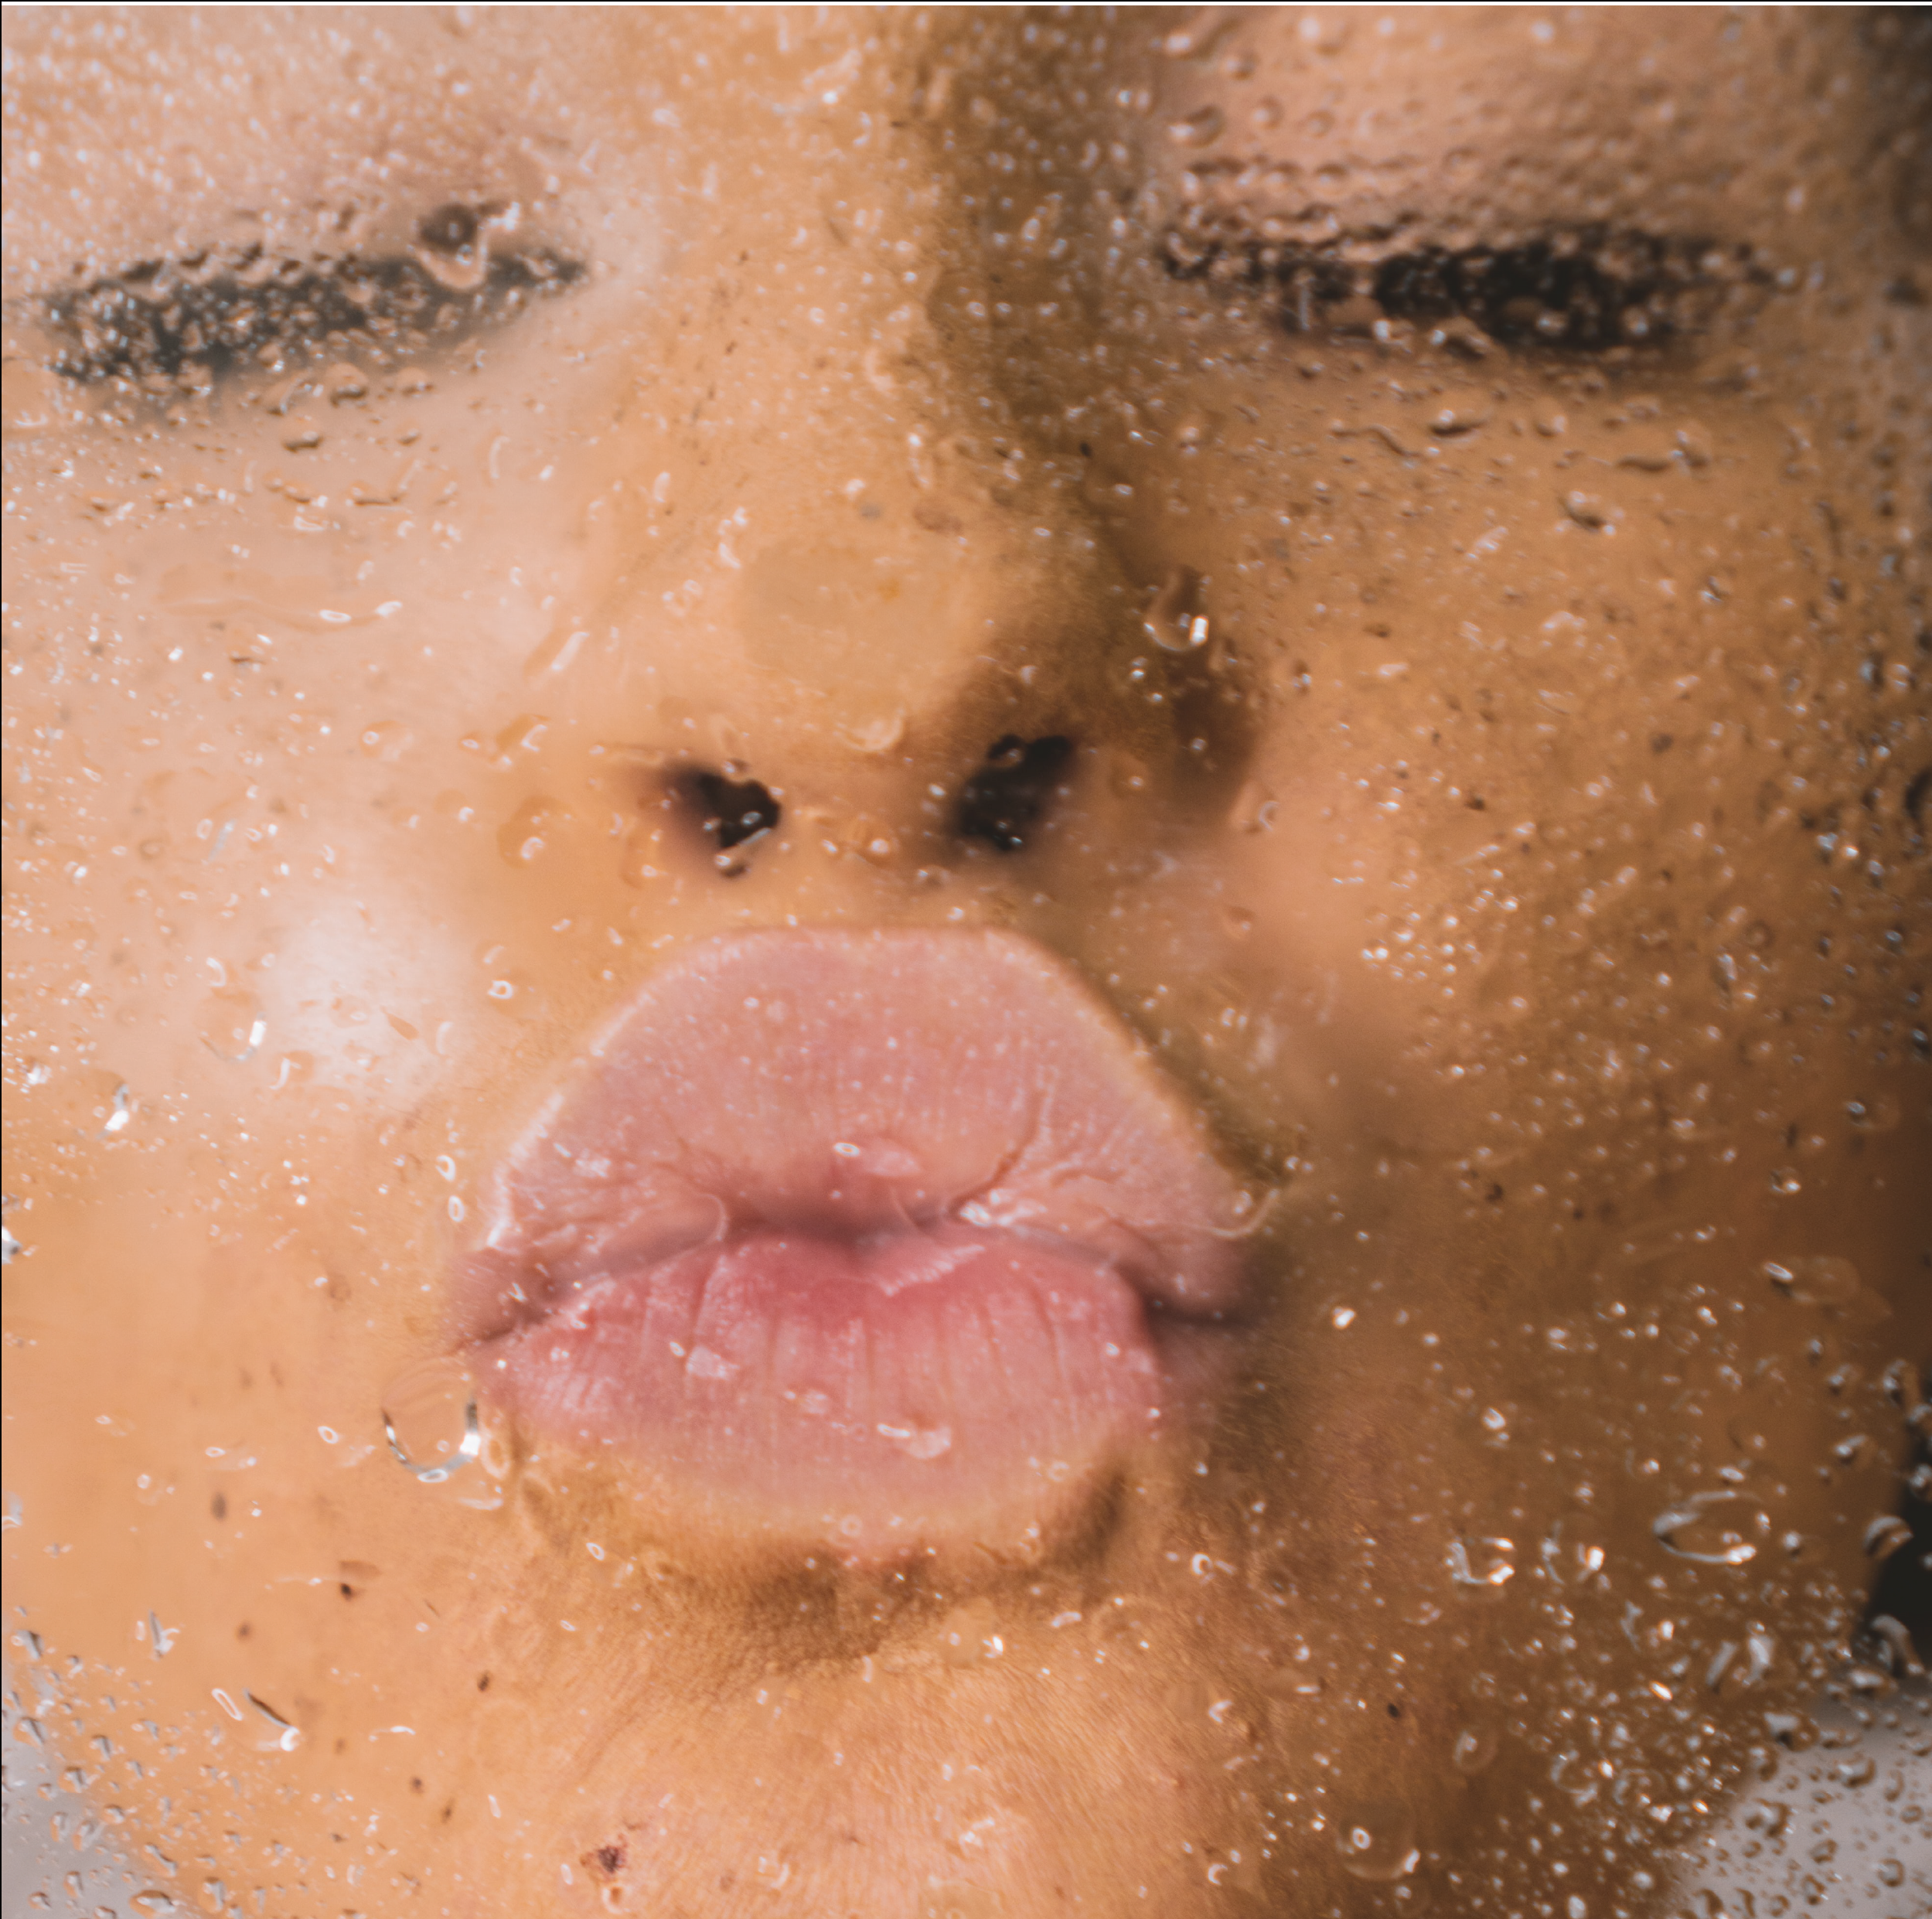 Woman kissing glass with water droplets